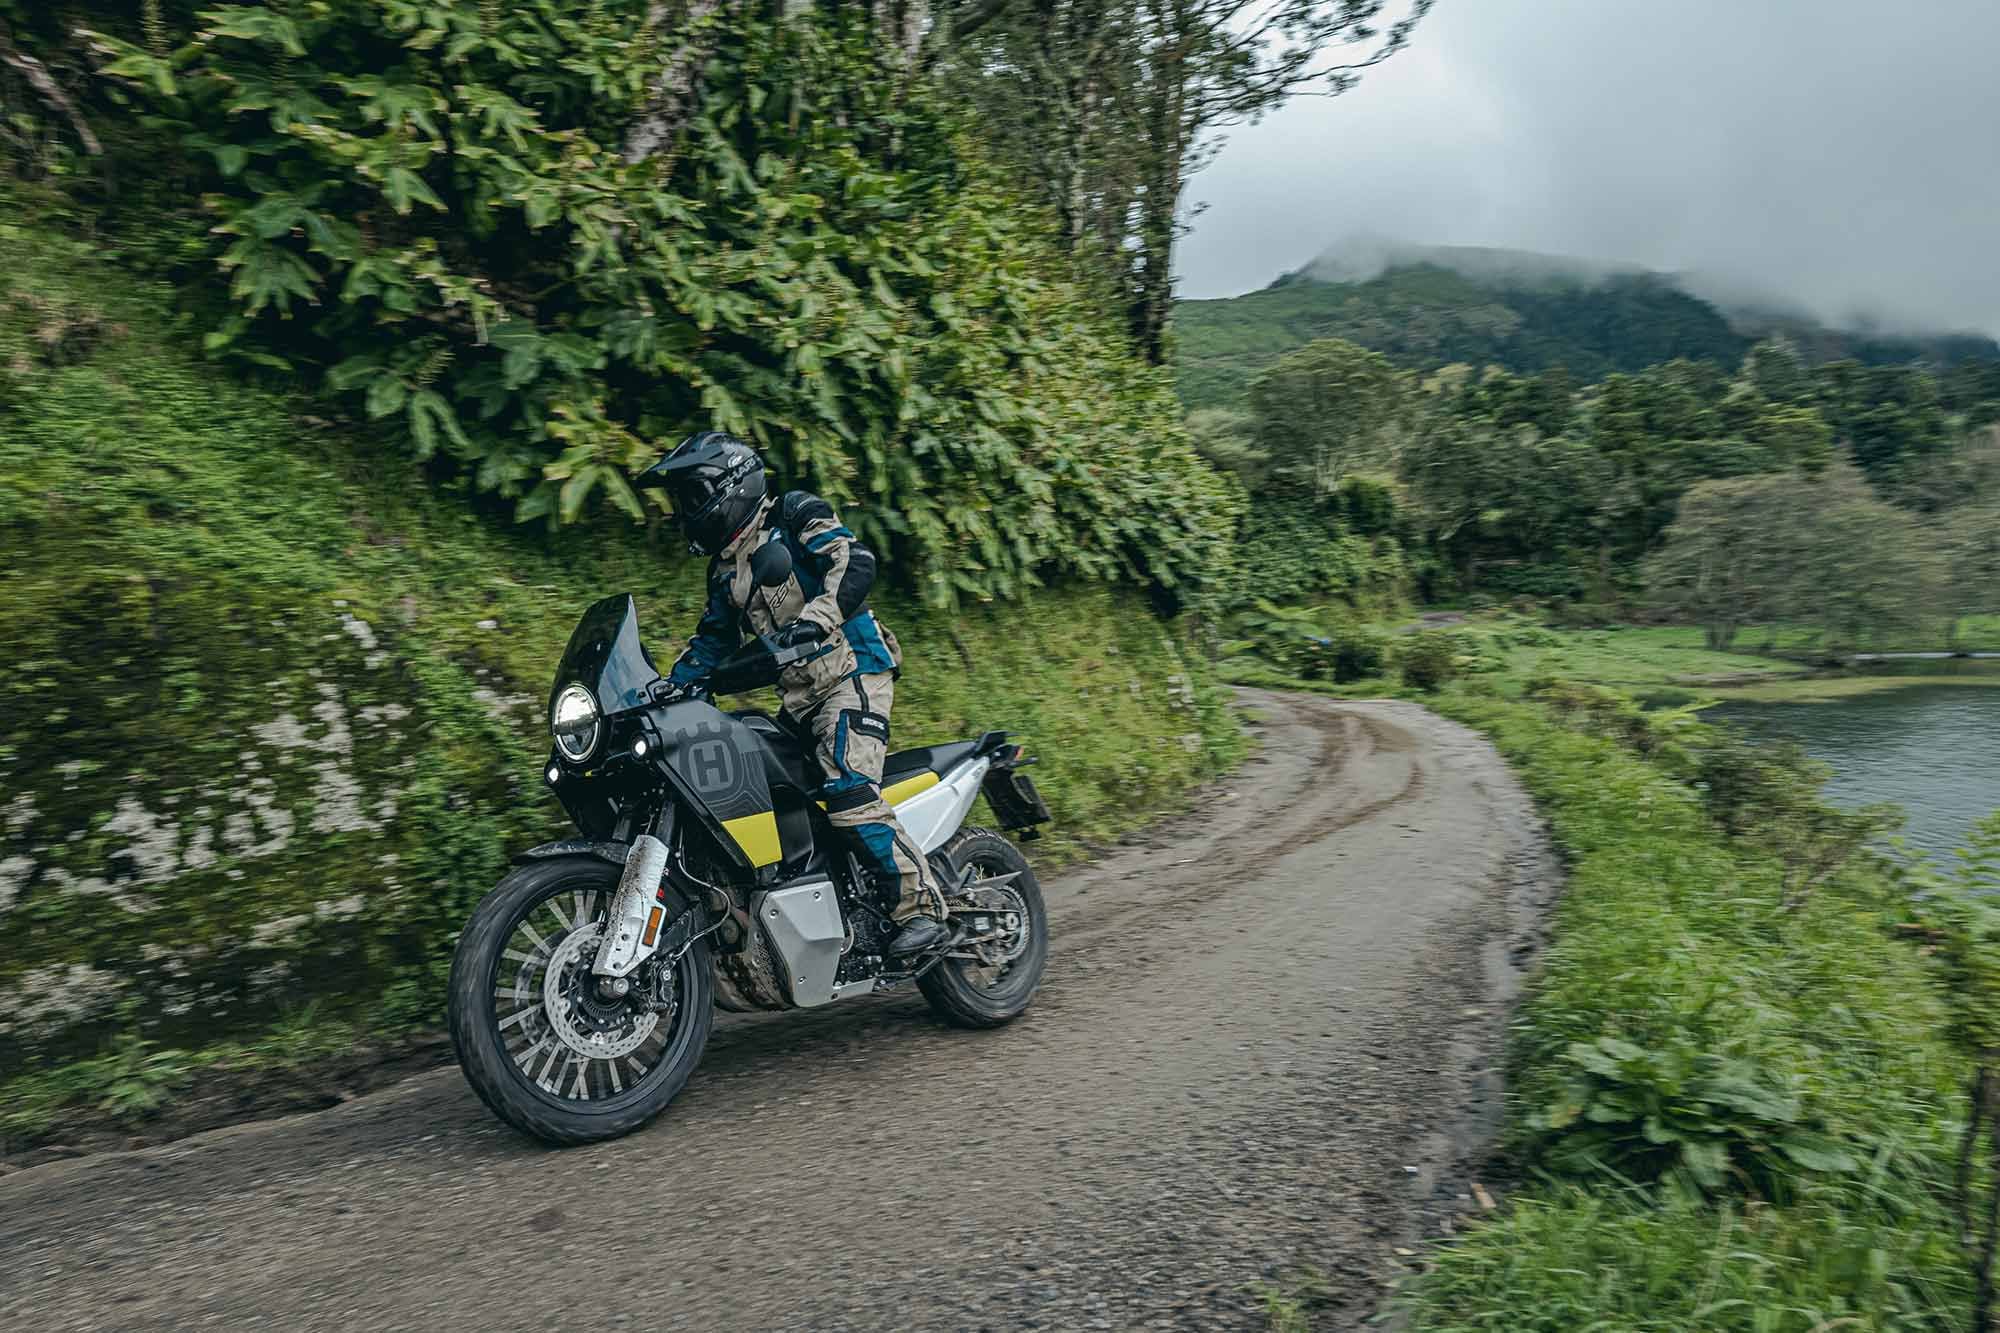 The test ran for two days in the stunning Azores islands. This was a true examination of Husky’s first global adventure bike in every condition imaginable.